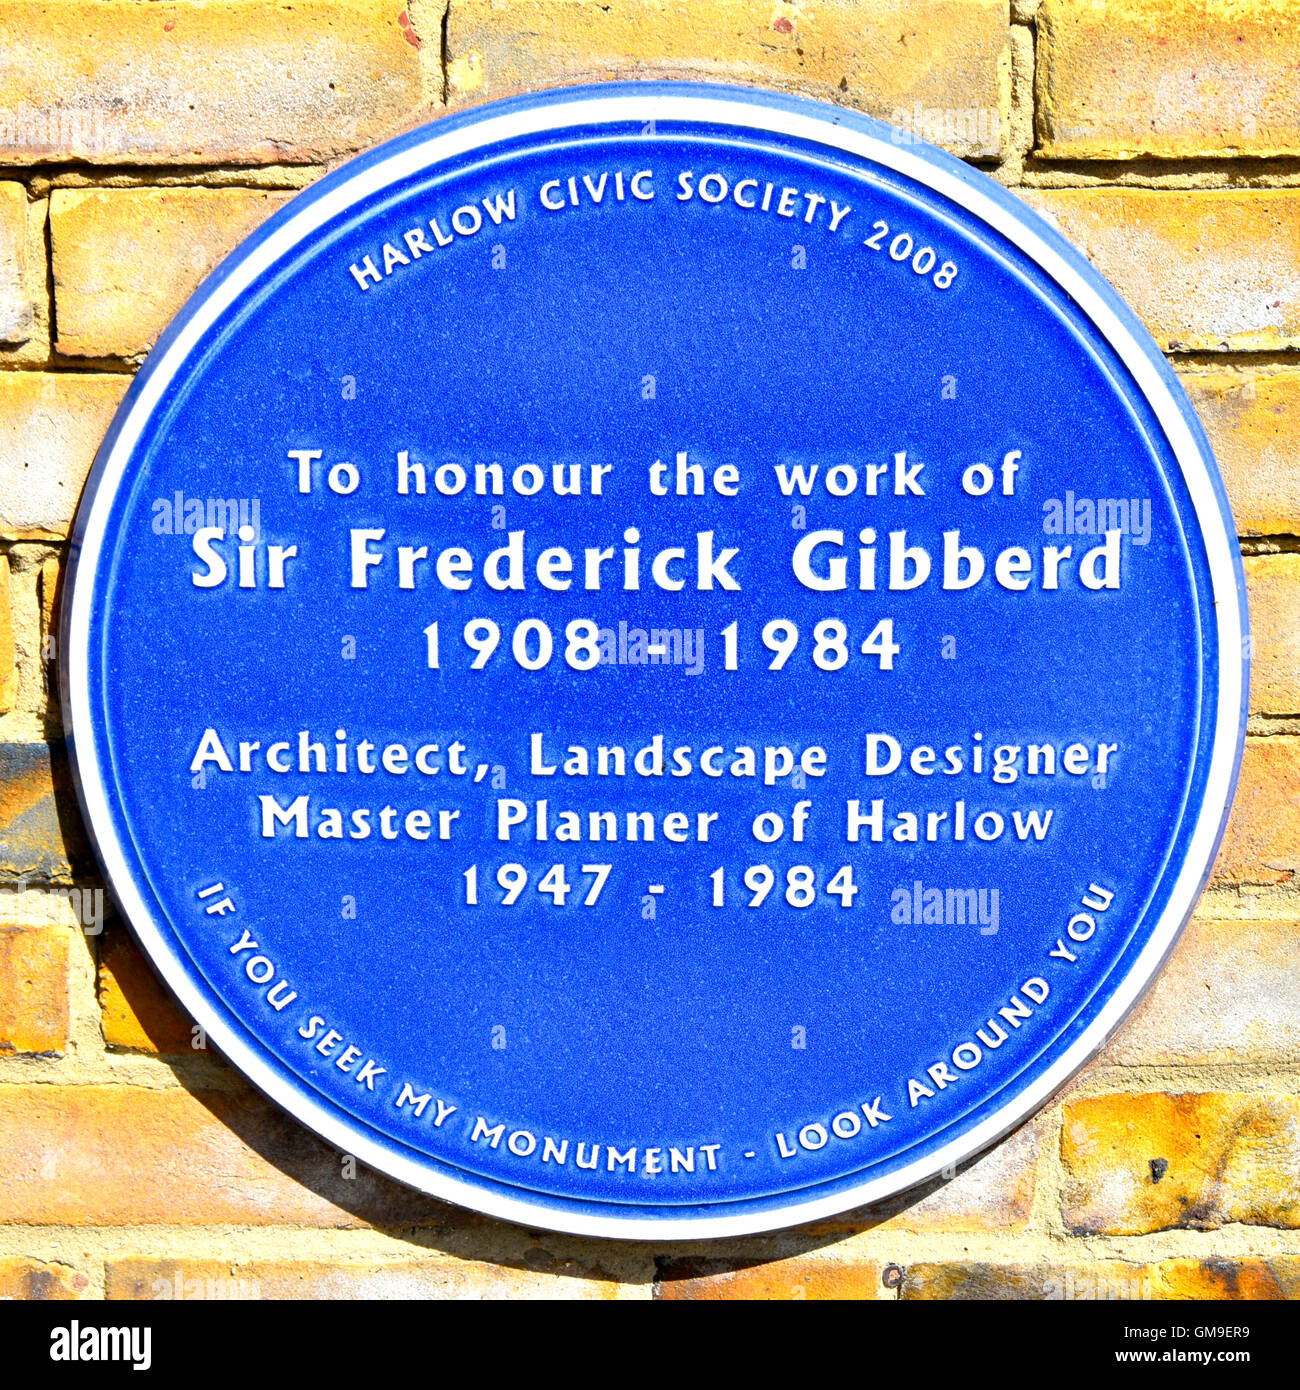 Blue Plaque Harlow Civic Centre Essex England UK to honour the work of Sir Frederick Gibberd 1908 - 1983 designer of the Harlow new town development Stock Photo